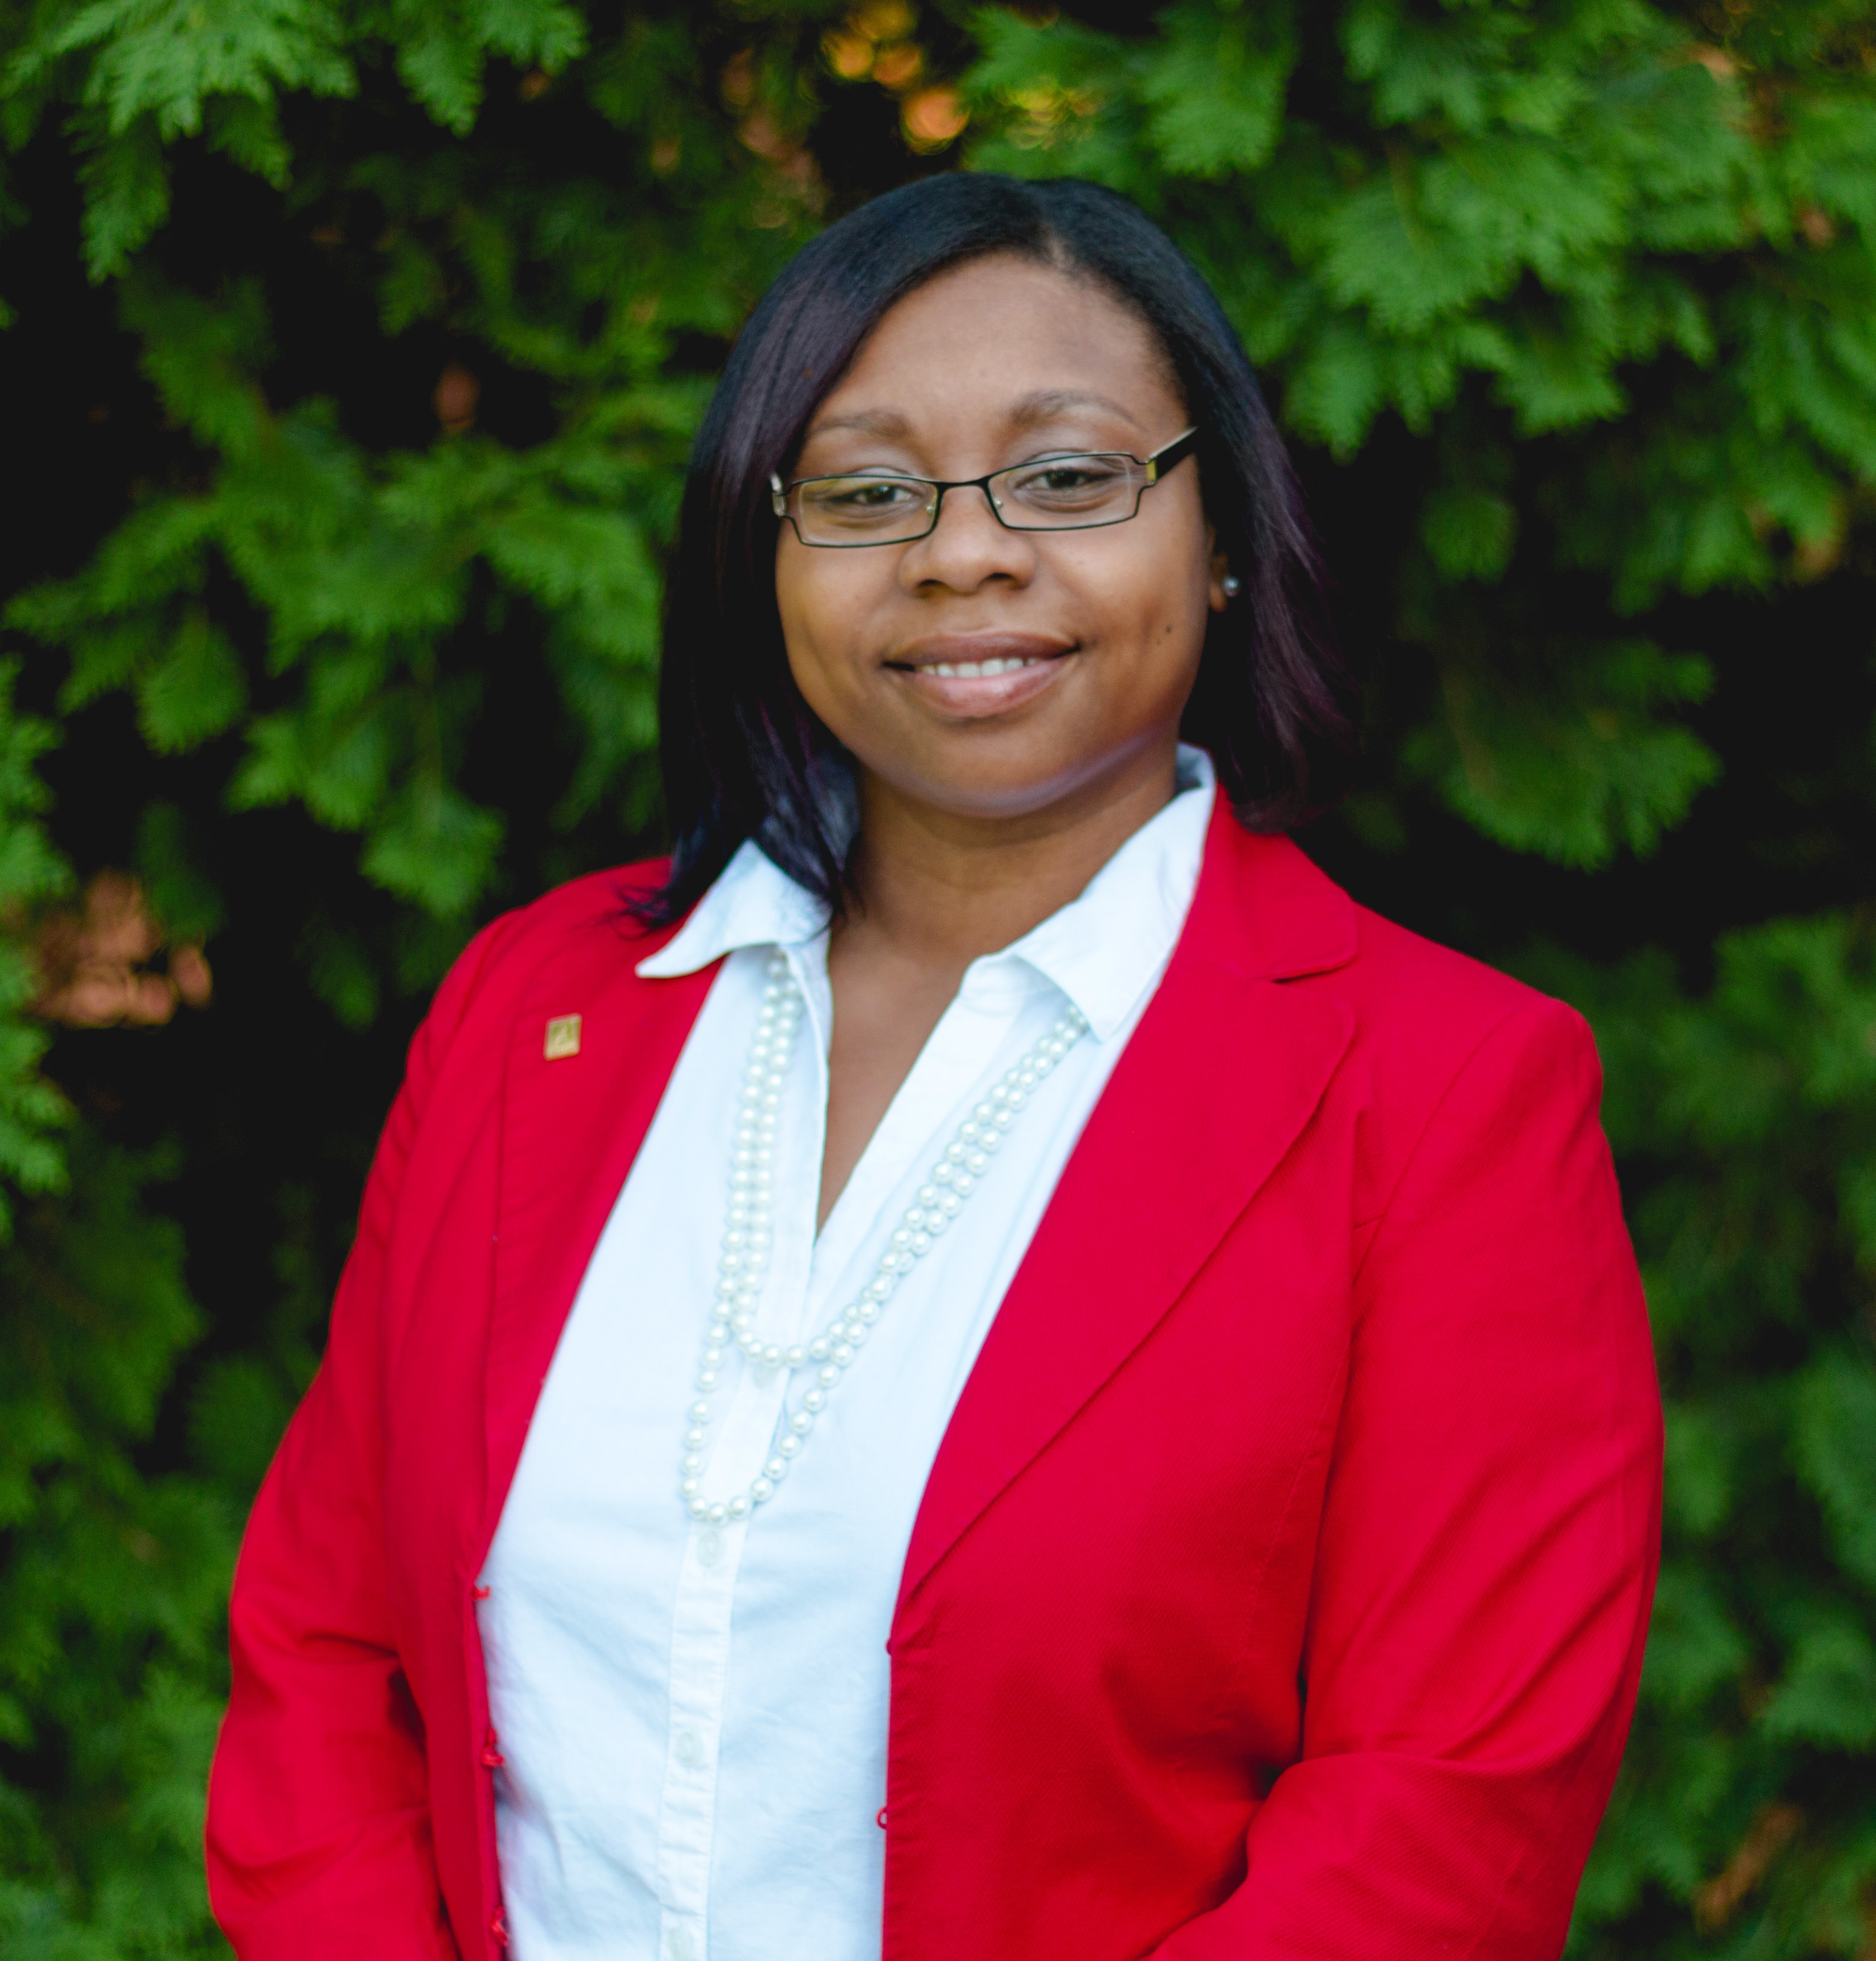 Chantia Lewis, Alderwoman for Milwaukee’s 9th District and candidate for U.S. Senate made the following statement upon notification of the District Attorney filing of criminal charges for campaign compliance issues.